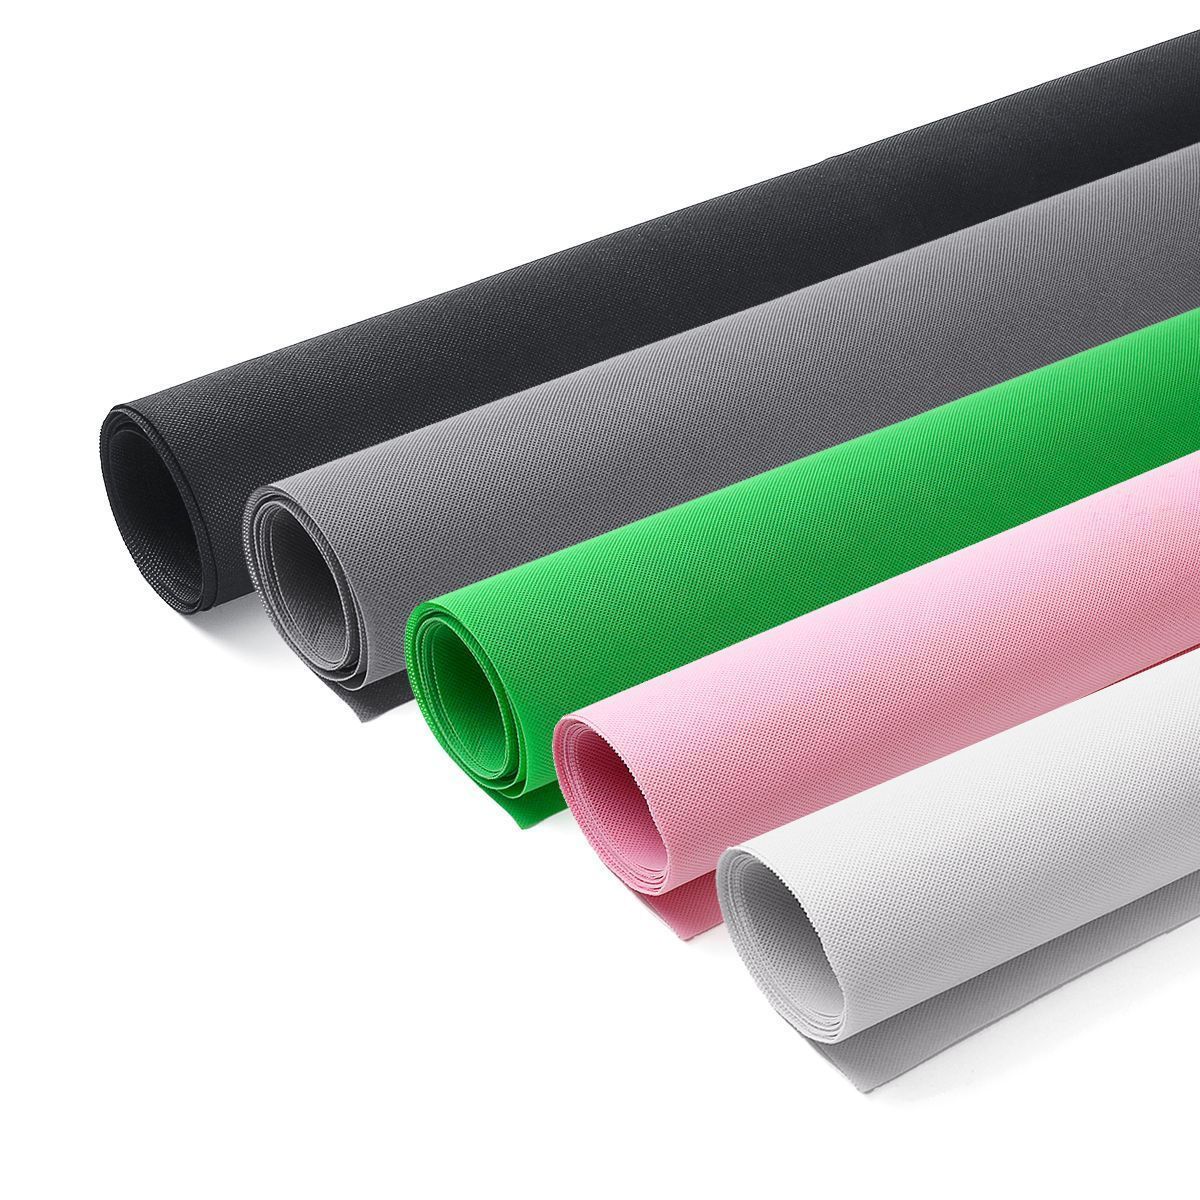 3x9FT-Vinyl-Pure-Color-Green-White-Black-Grey-Pink-Backdrop-Photography-Background-Studio-Prop-1501061